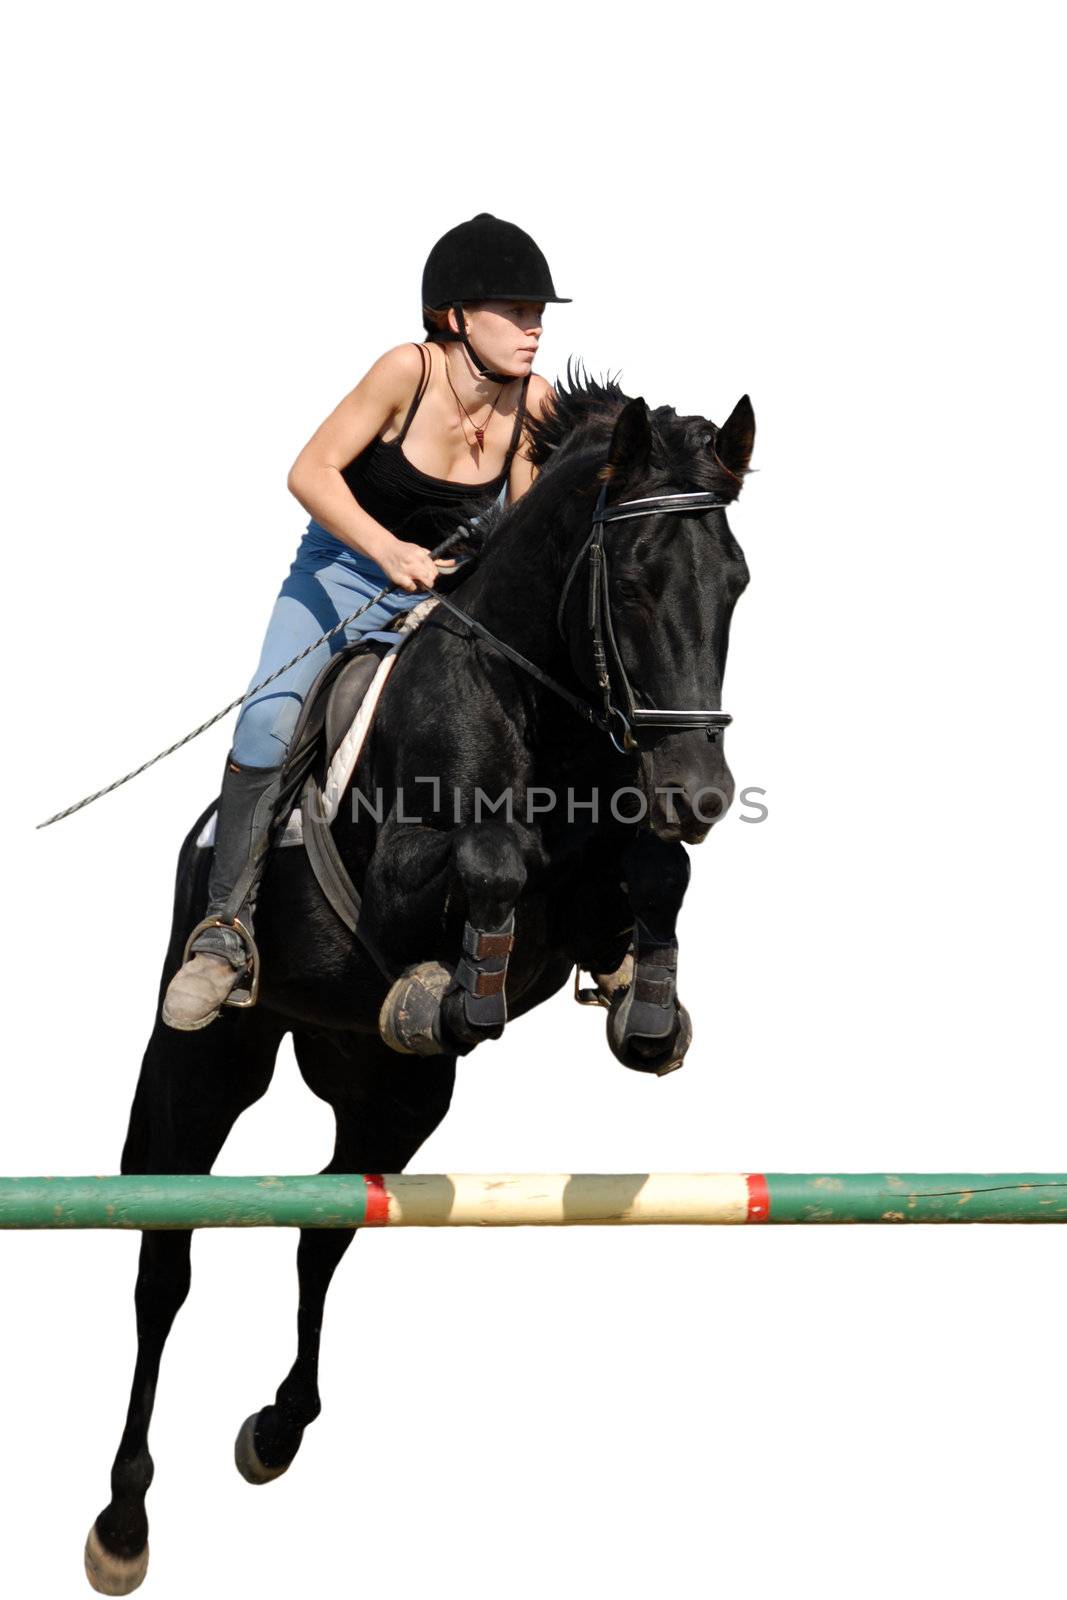 young teenager and her black horse in training of jumping competition

horse, teen, teenager, woman, stallion, black, jump, jumping, competition, training, horseback riding, sport, girl, child, animal, rural, mammal, pet, risk